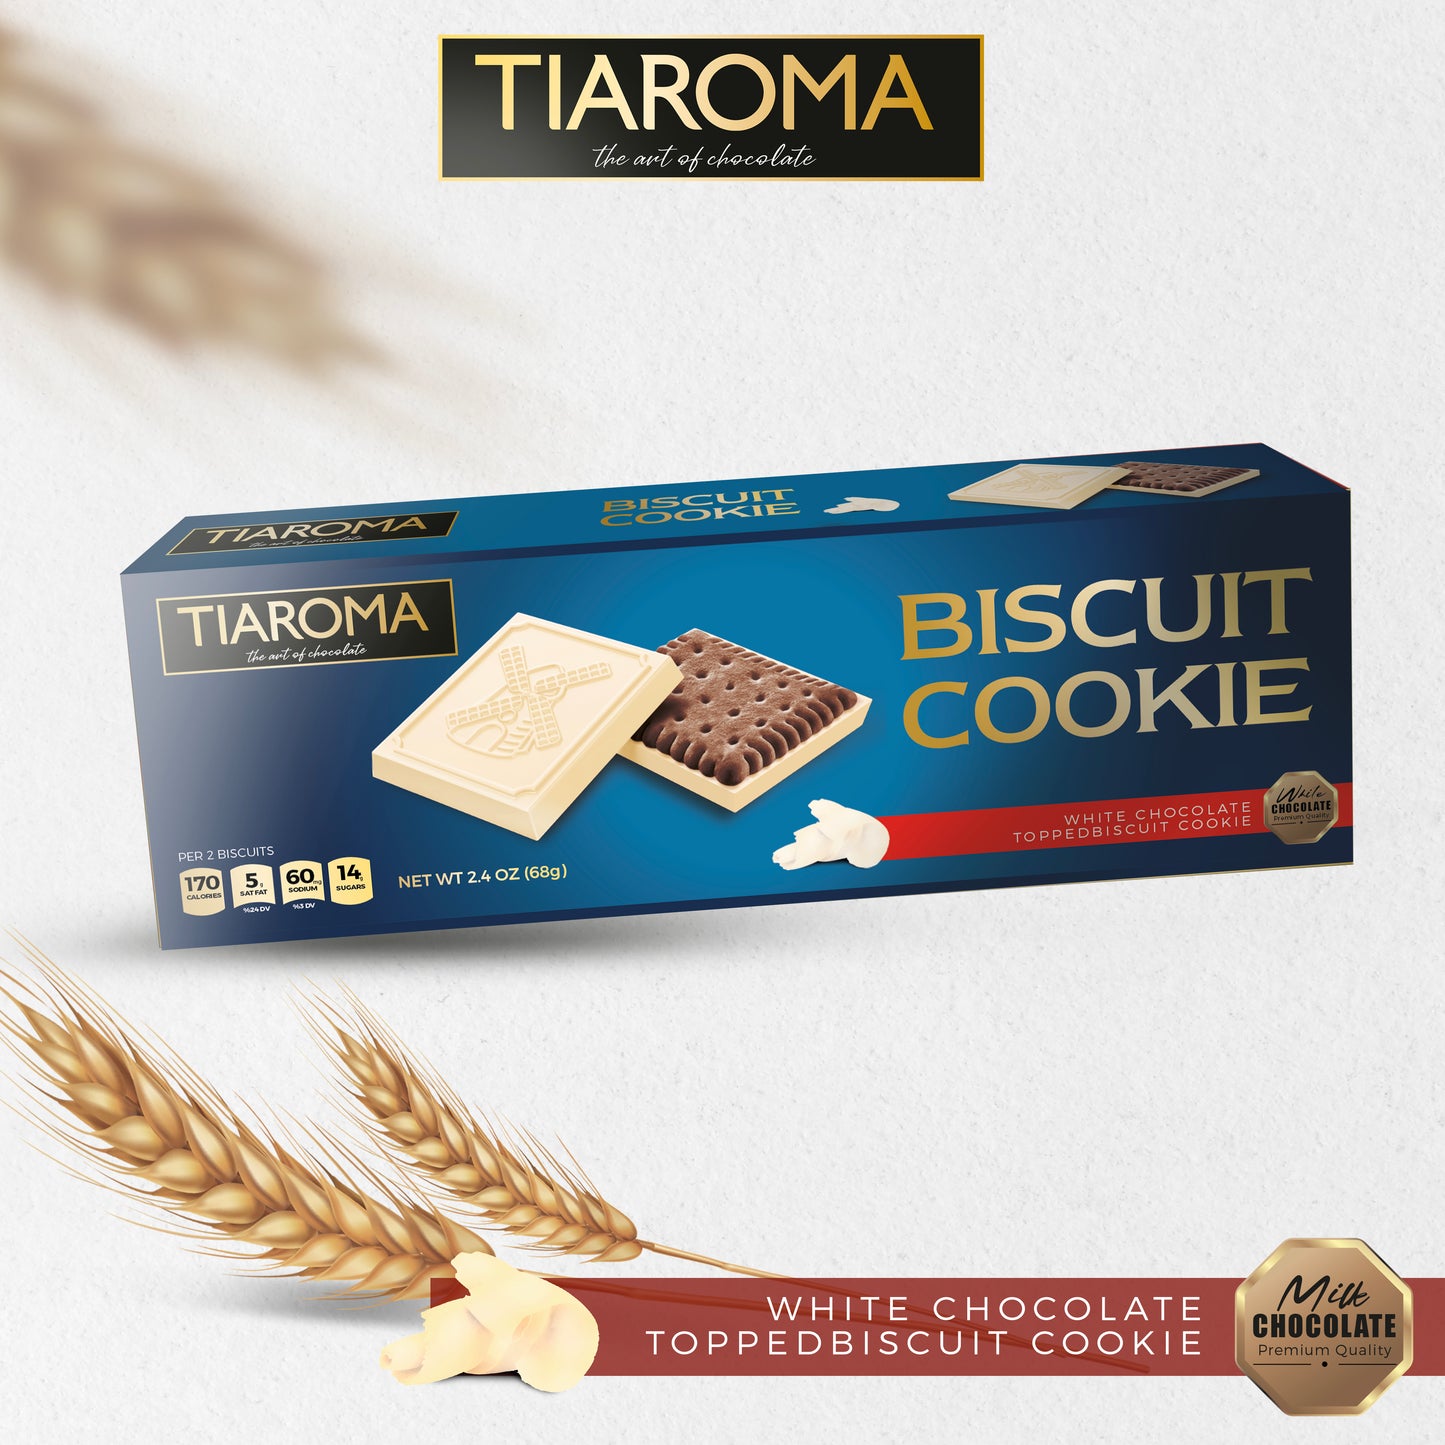 White Chocolate Topped Biscuit Cookie - Premium Quality European Petit Biscuit (Individually Boxed, Pack of 6)